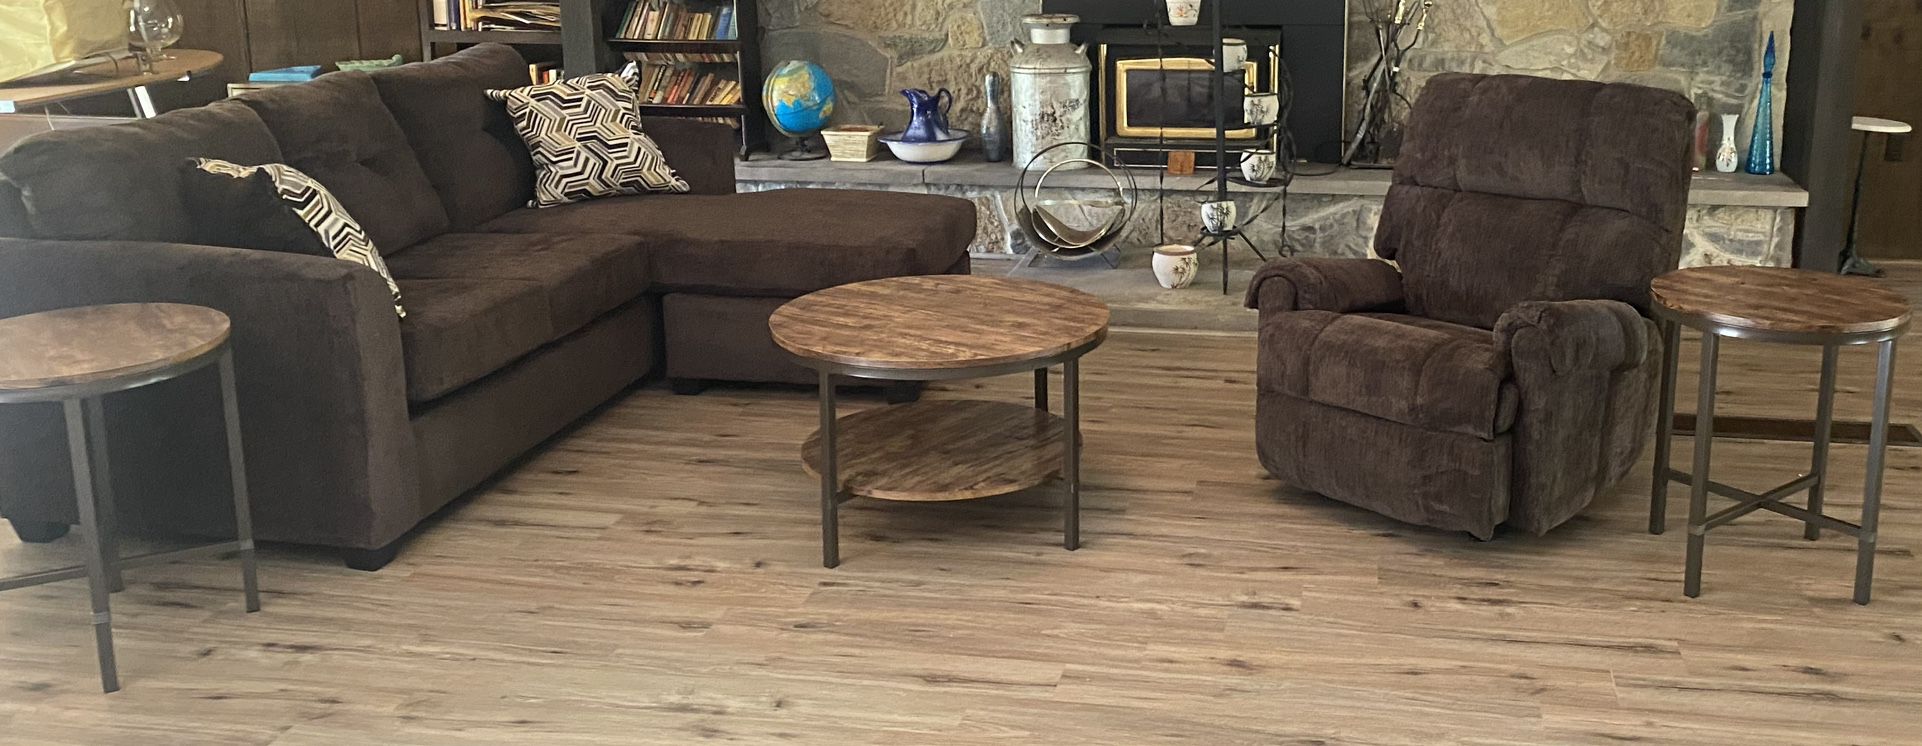 New Brown Living room Set With Tables